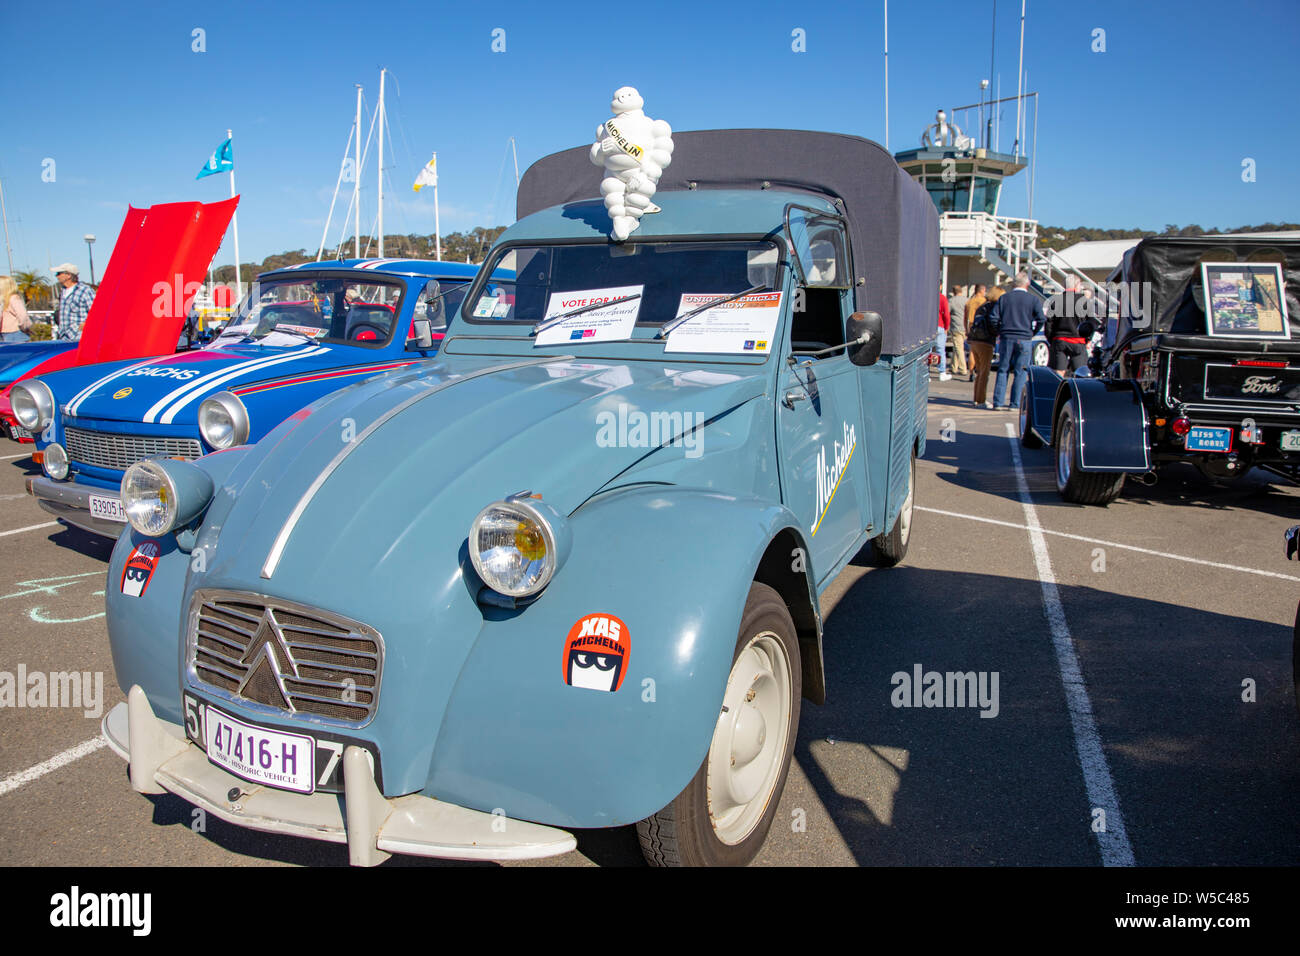 Citreon 2cv van with classic michelin man mounted on the roof of the van at a Sydney classic car show,Australia Stock Photo